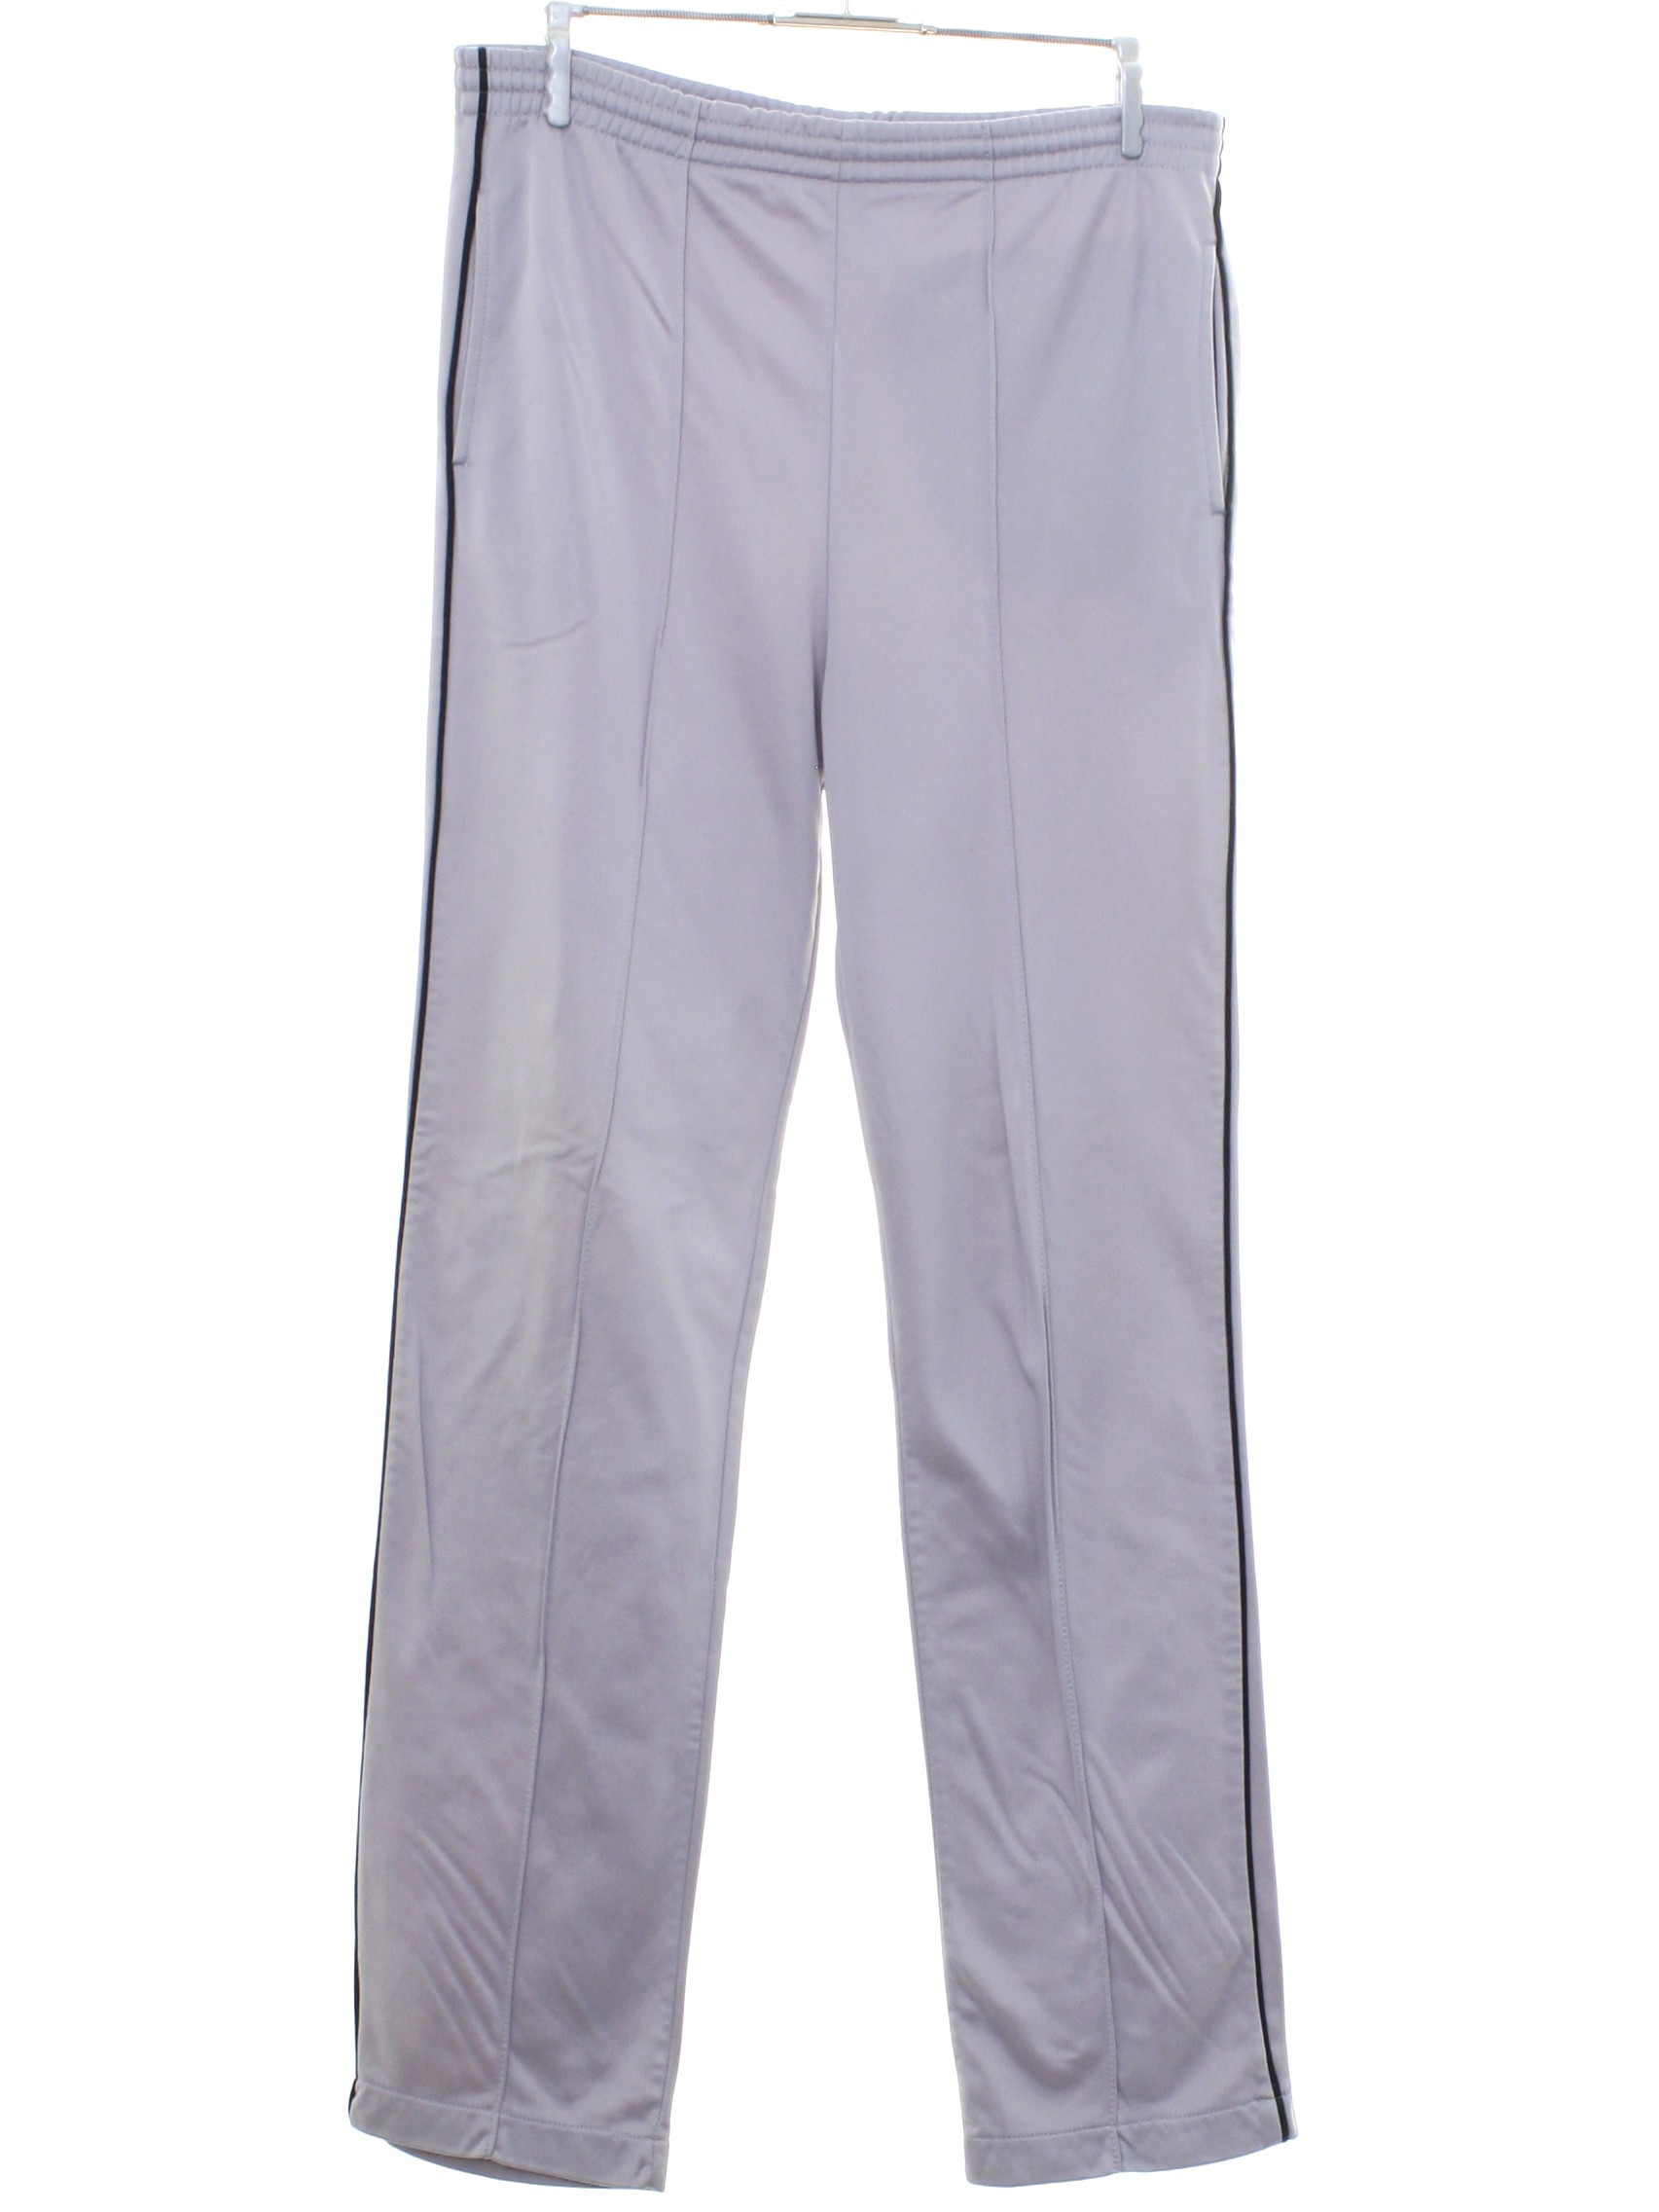 Pacific Scene Eighties Vintage Pants: Late 80s or Early 90s -Pacific Scene-  Mens light grey and black polyester and acetate blend jogging pants. Piping  stripe down the outside of the legs, inset